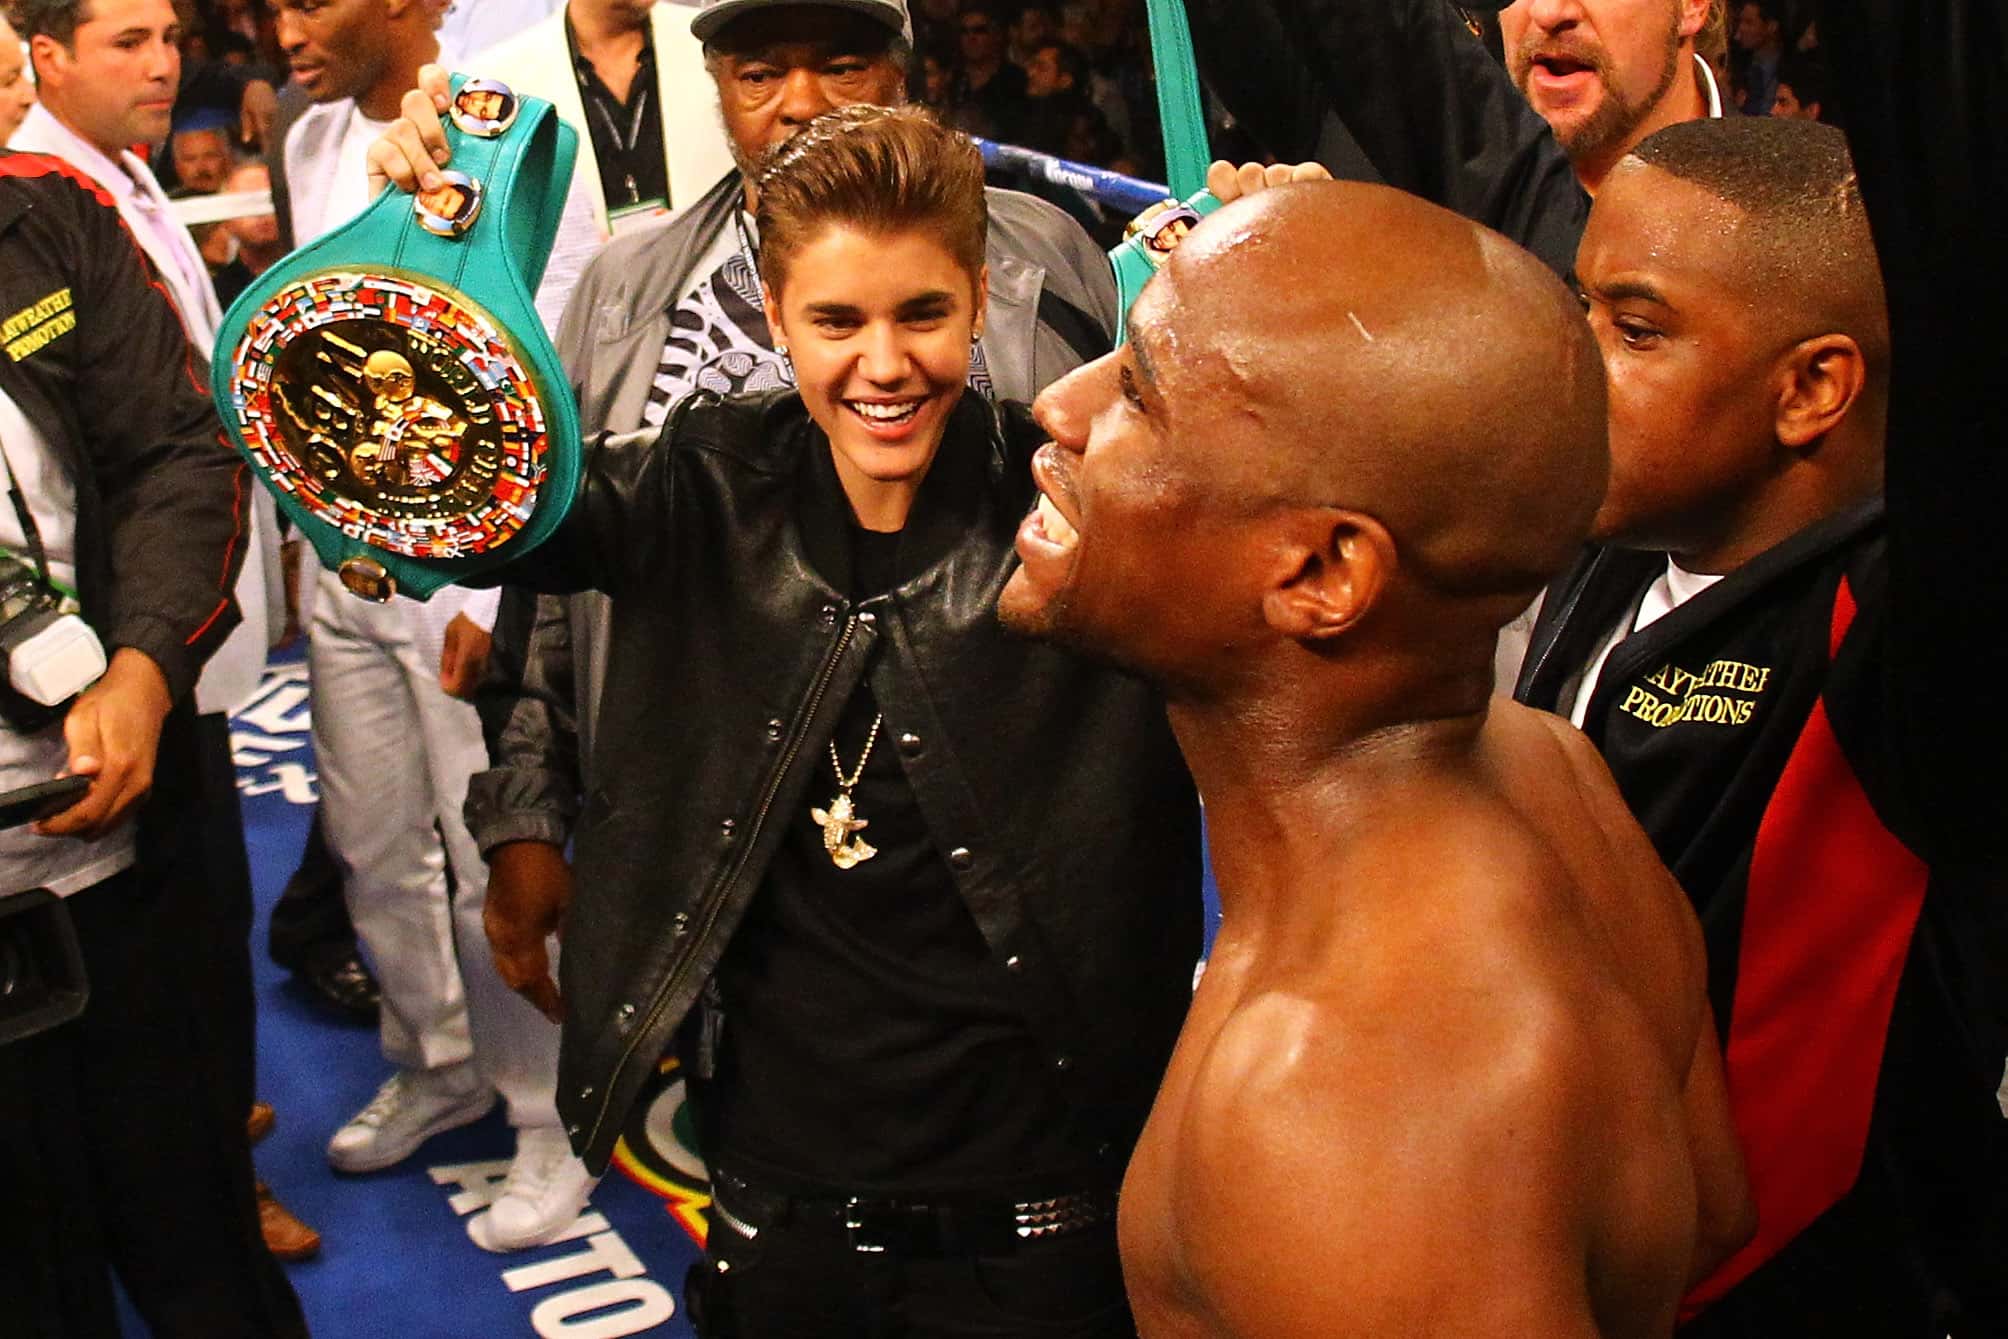 Interesting facts about Floyd Mayweather